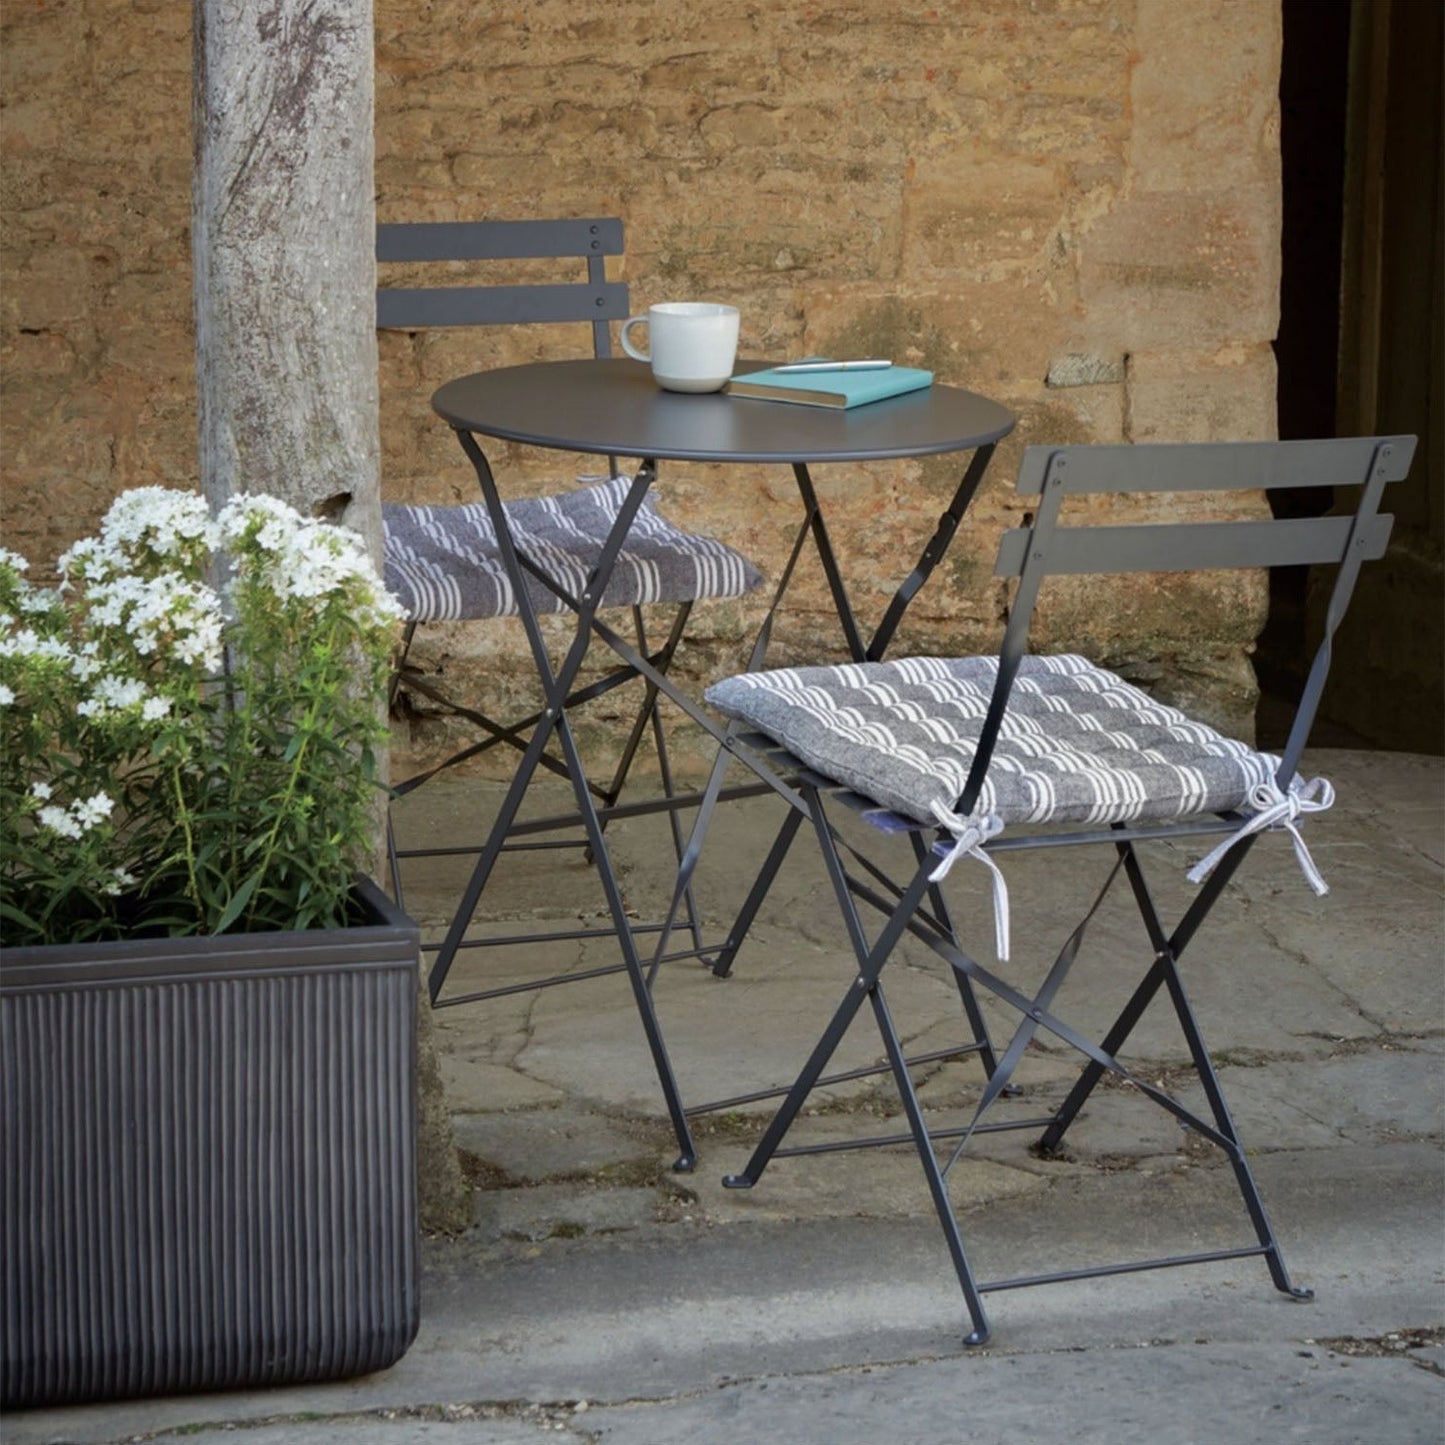 Rive Droite Bistro Outdoor Set Small Carbon Steel by Garden Trading